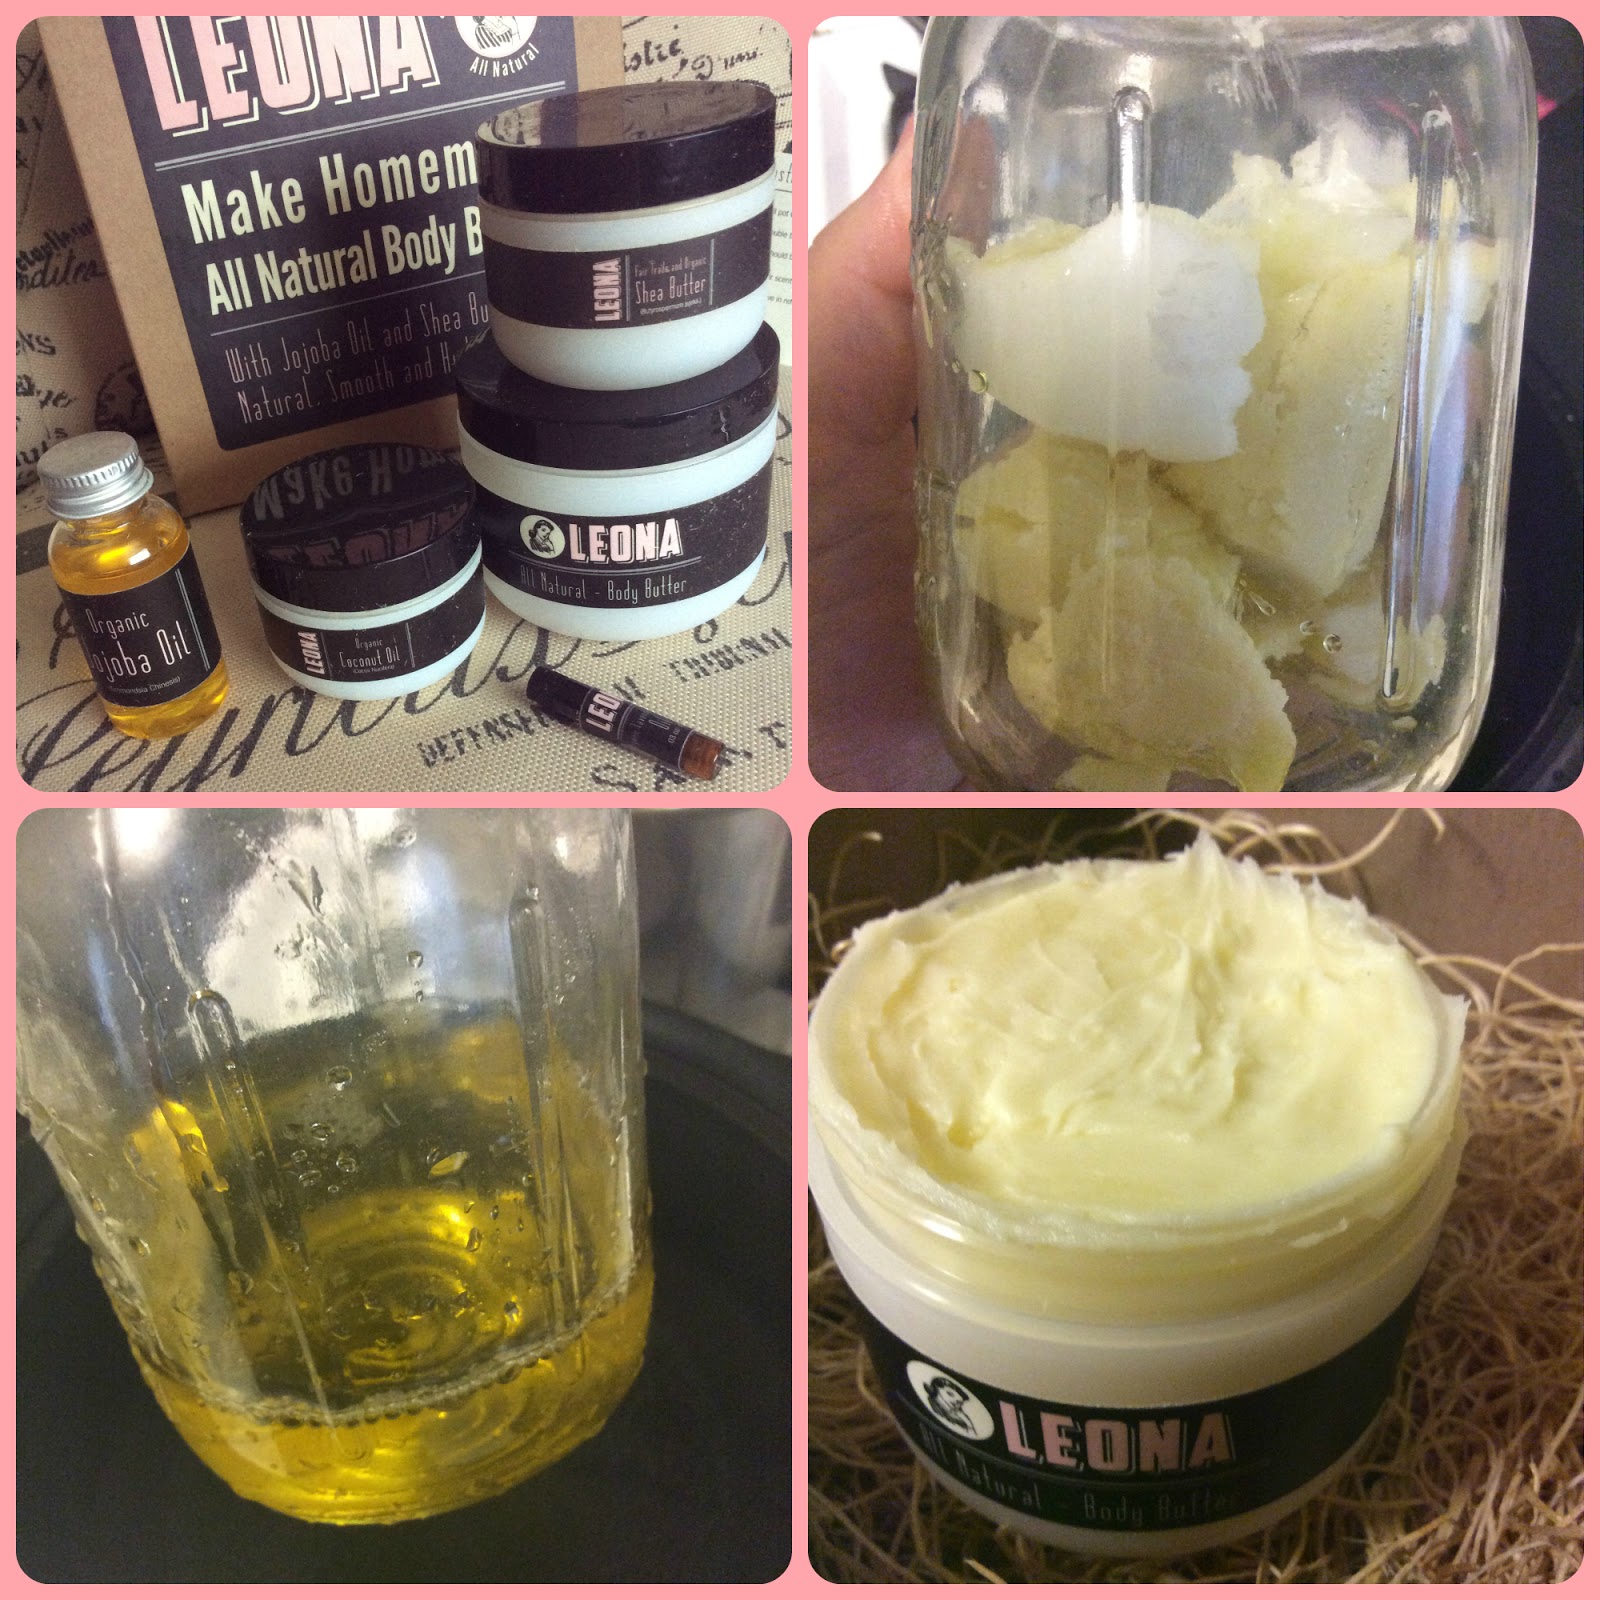 Nesca's Nook: Leona DIY Body Butter Kit - Perfect for the Holidays